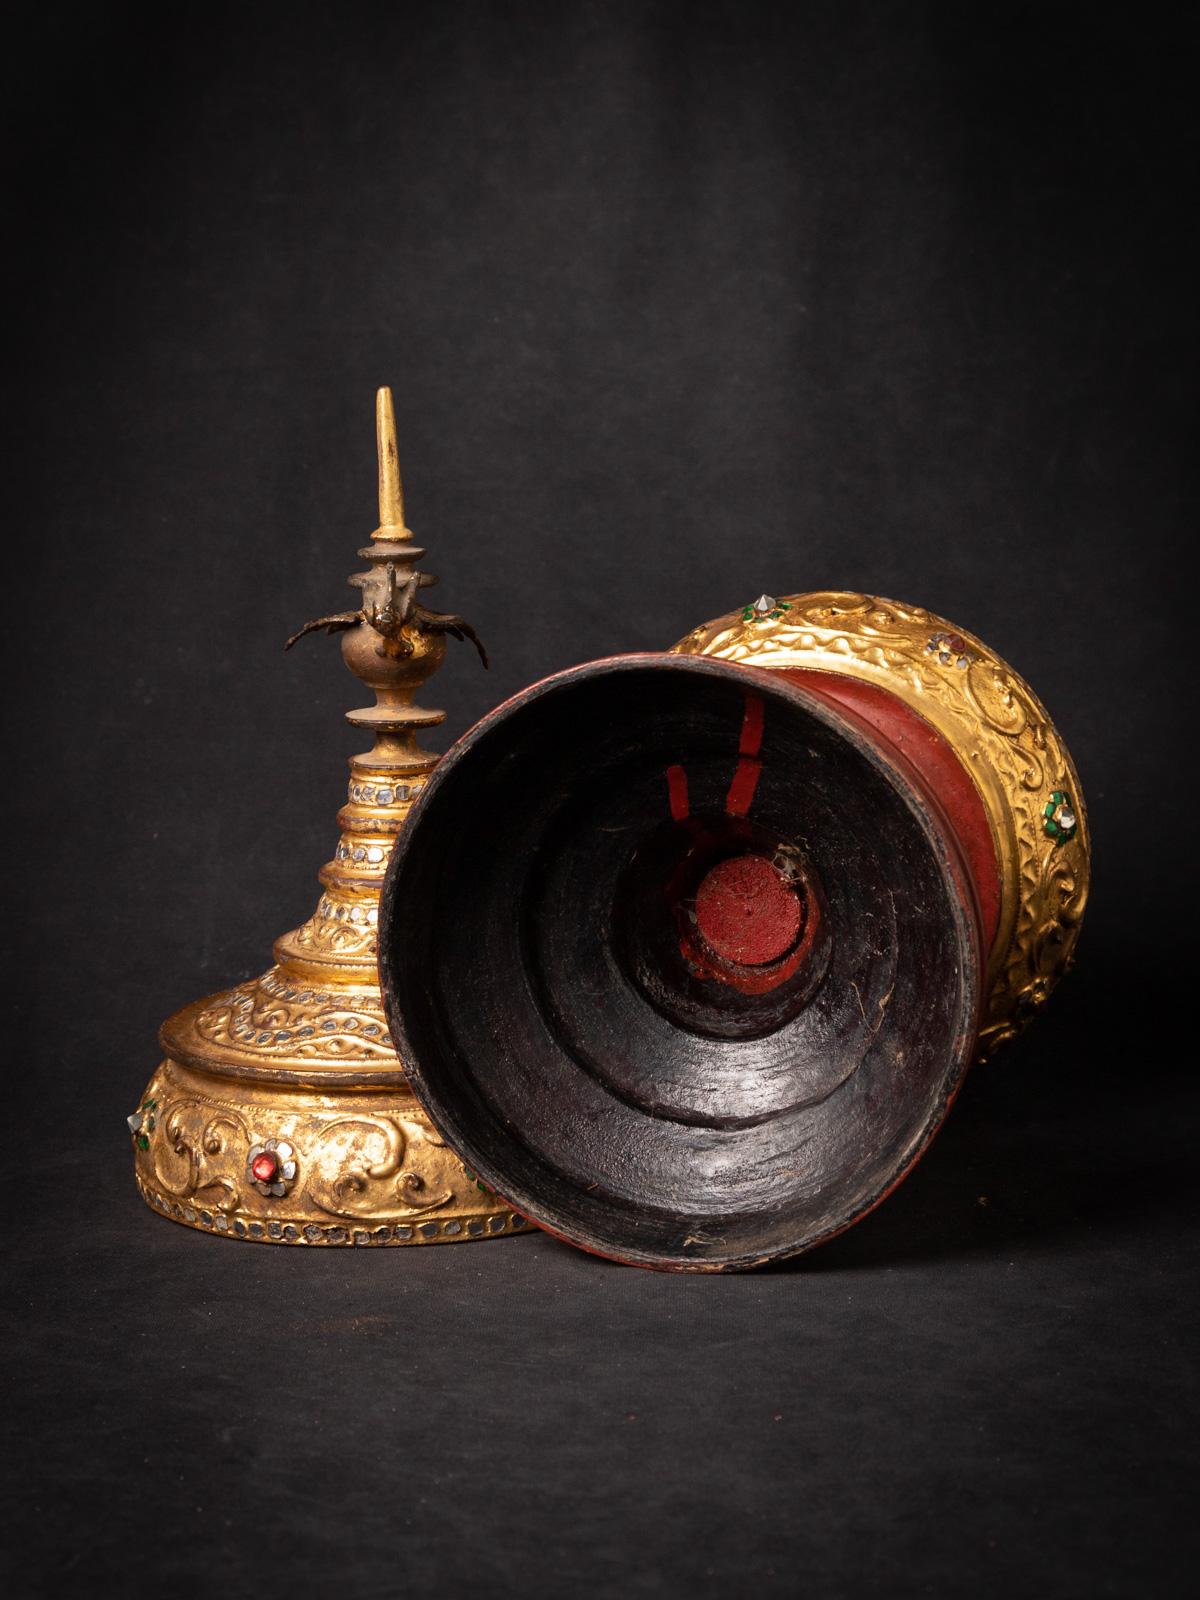 Antique Burmese offering vessel with Hintha bird
Material : lacquerware
46,8 cm high
18,5 cm diameter
Gilded with 24 krt. gold
Mandalay style
19th century
Weight: 849 grams
Originating from Burma